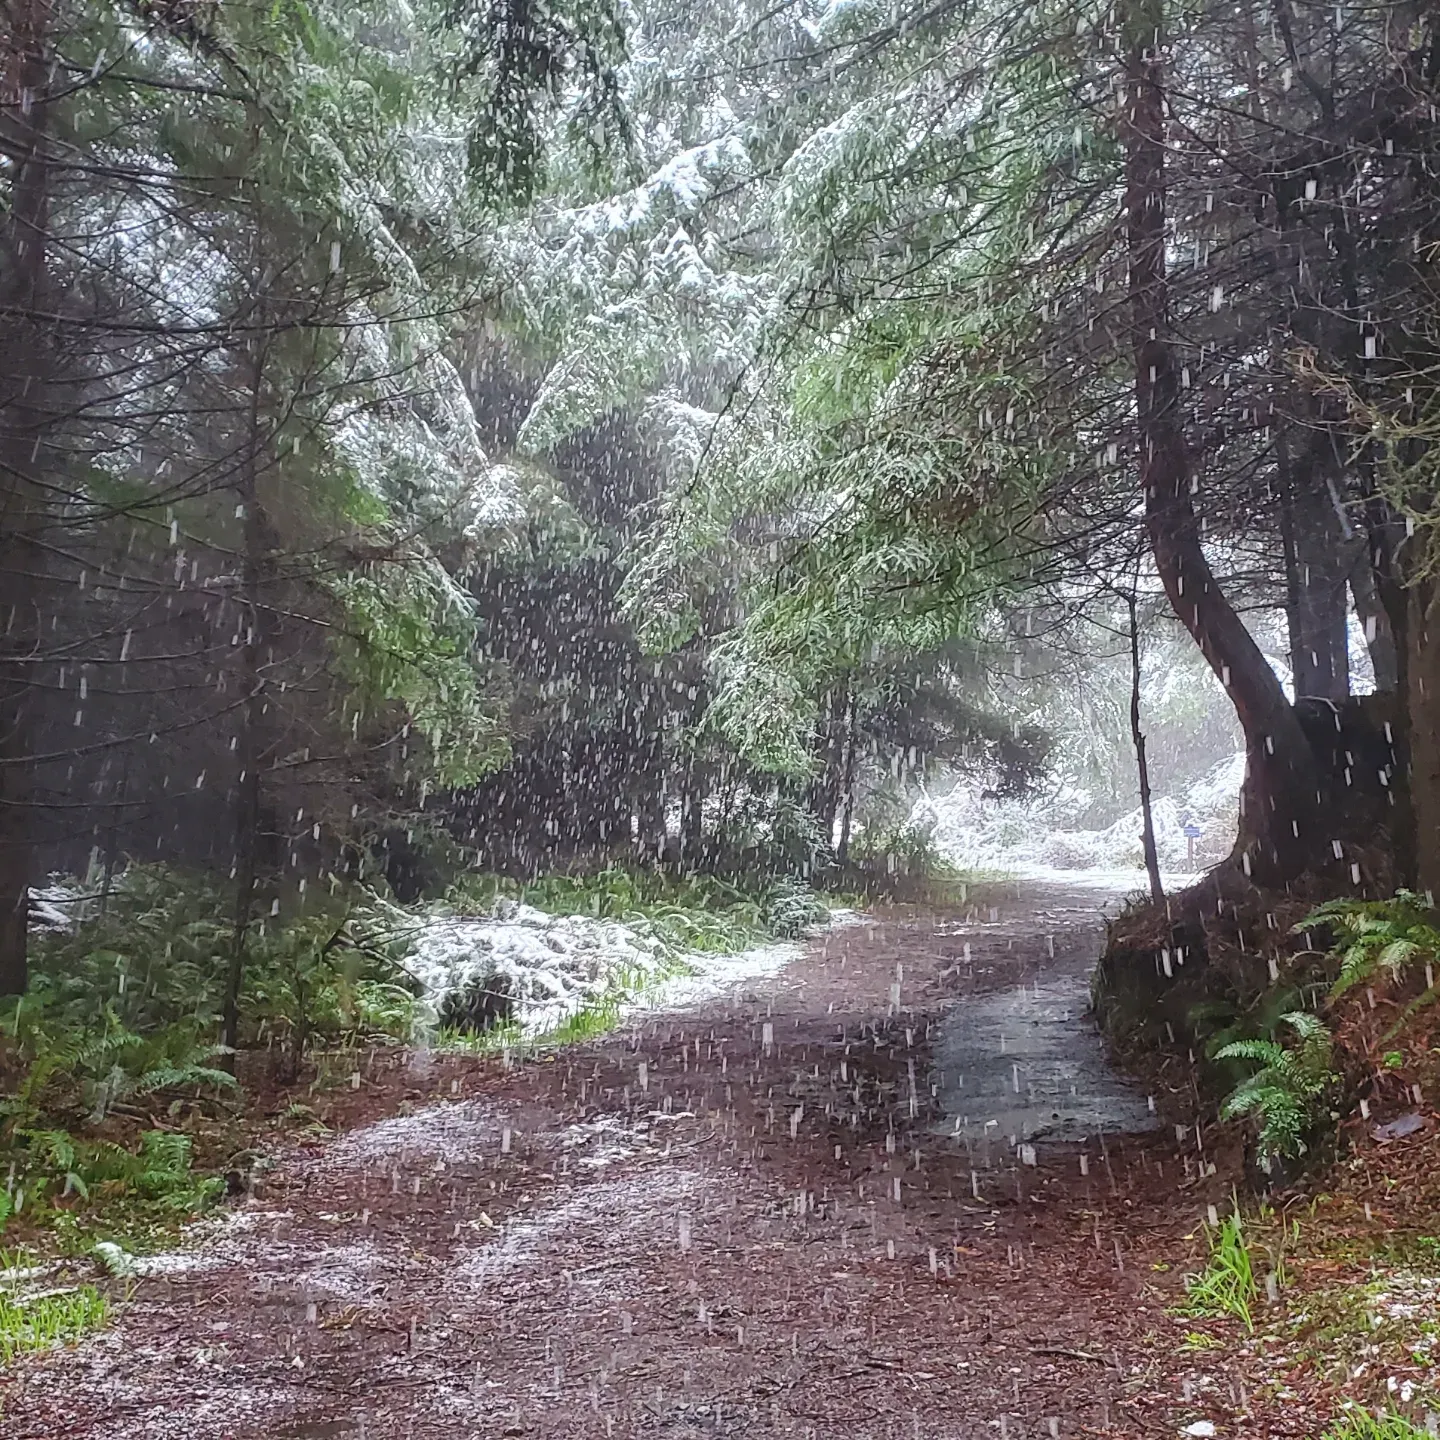 Picturesque dirt path through a redwood forest. Snow falling in heavy flakes, dusting the trees and ferns.